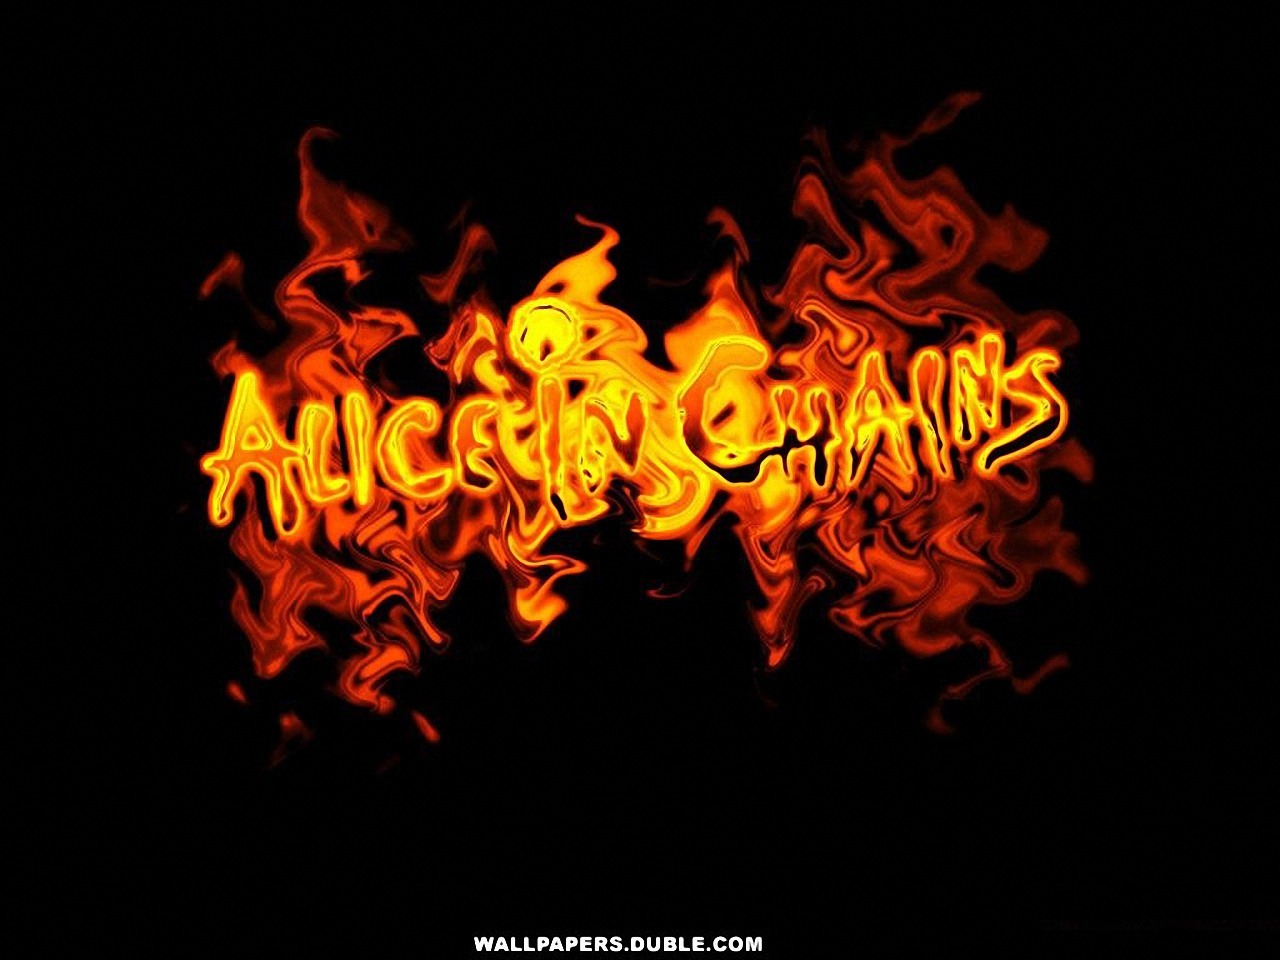 Wallpaper Alice In Chains Biography Rock